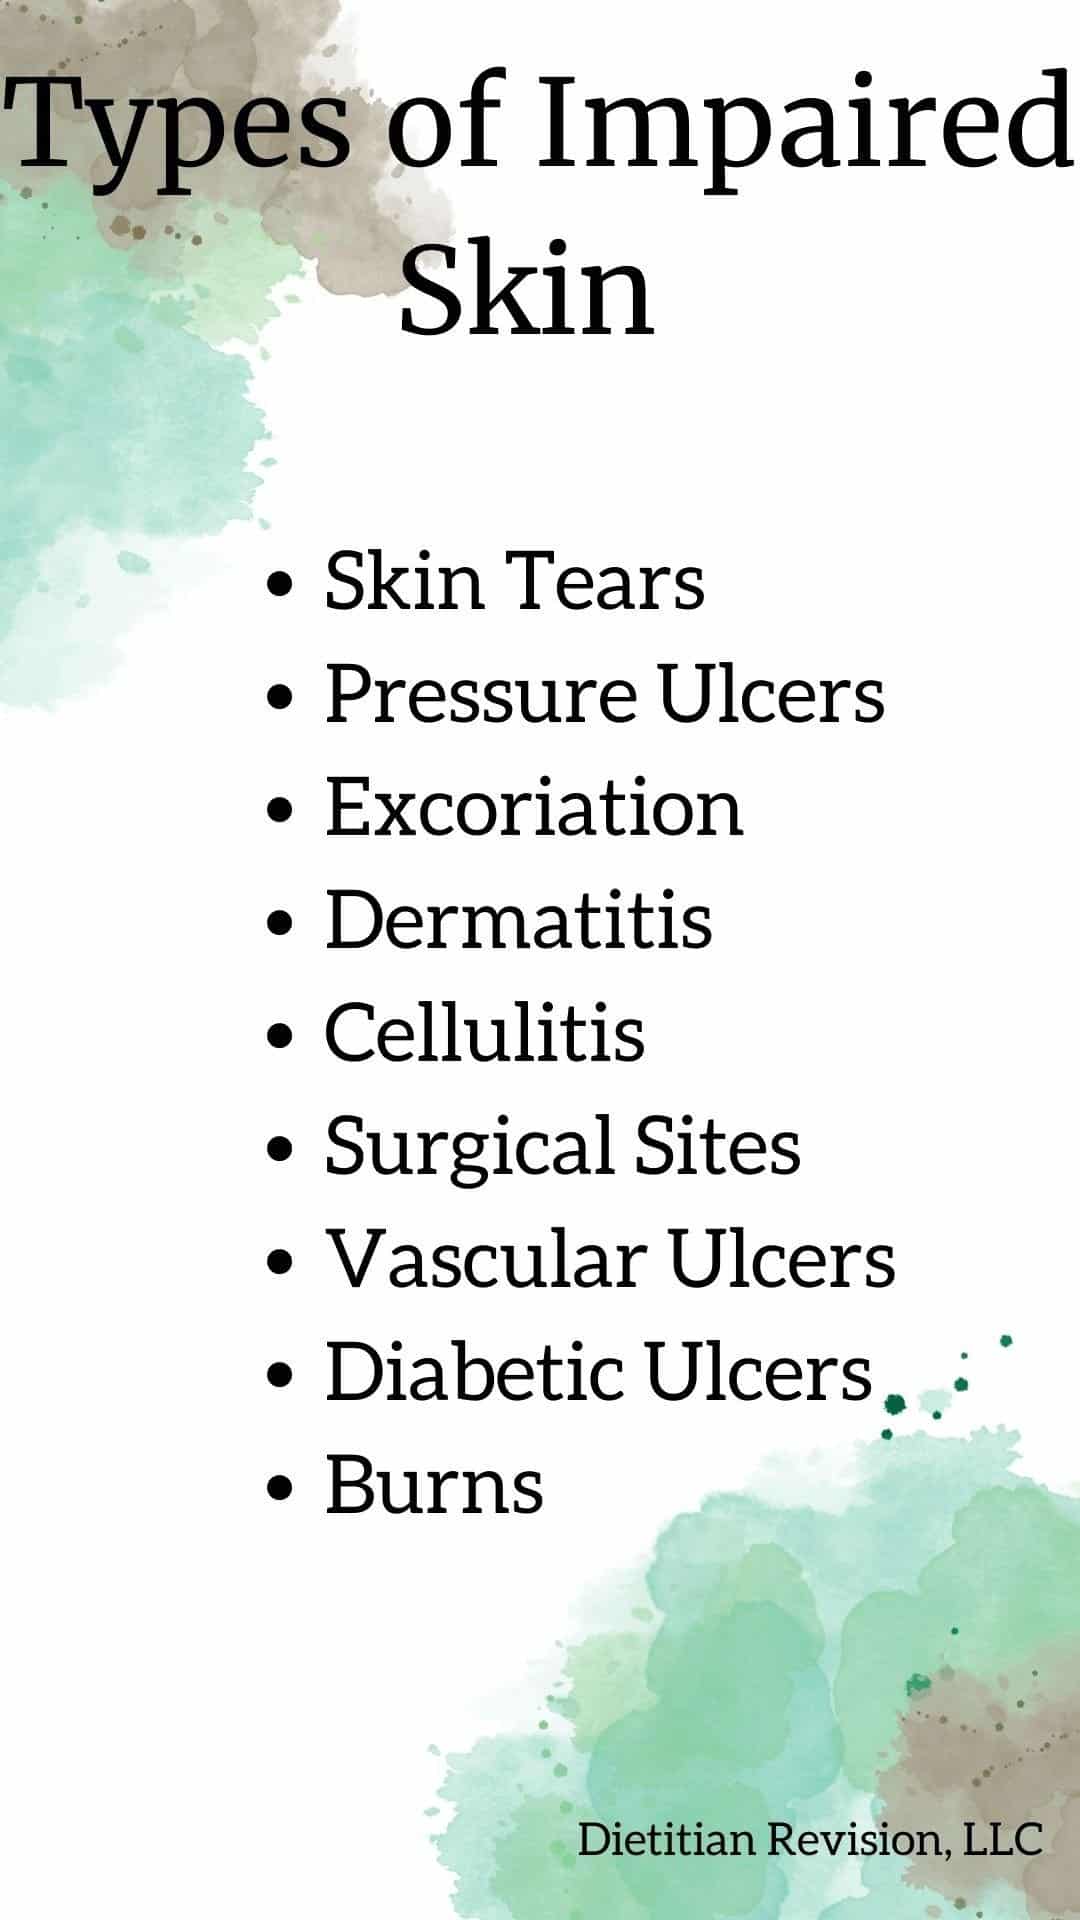 List of types of impaired skin: skin tears, pressure ulcers, excoriation, dermatitis, cellulitis, surgical sites, vascular ulcers, diabetic ulcers, burns.